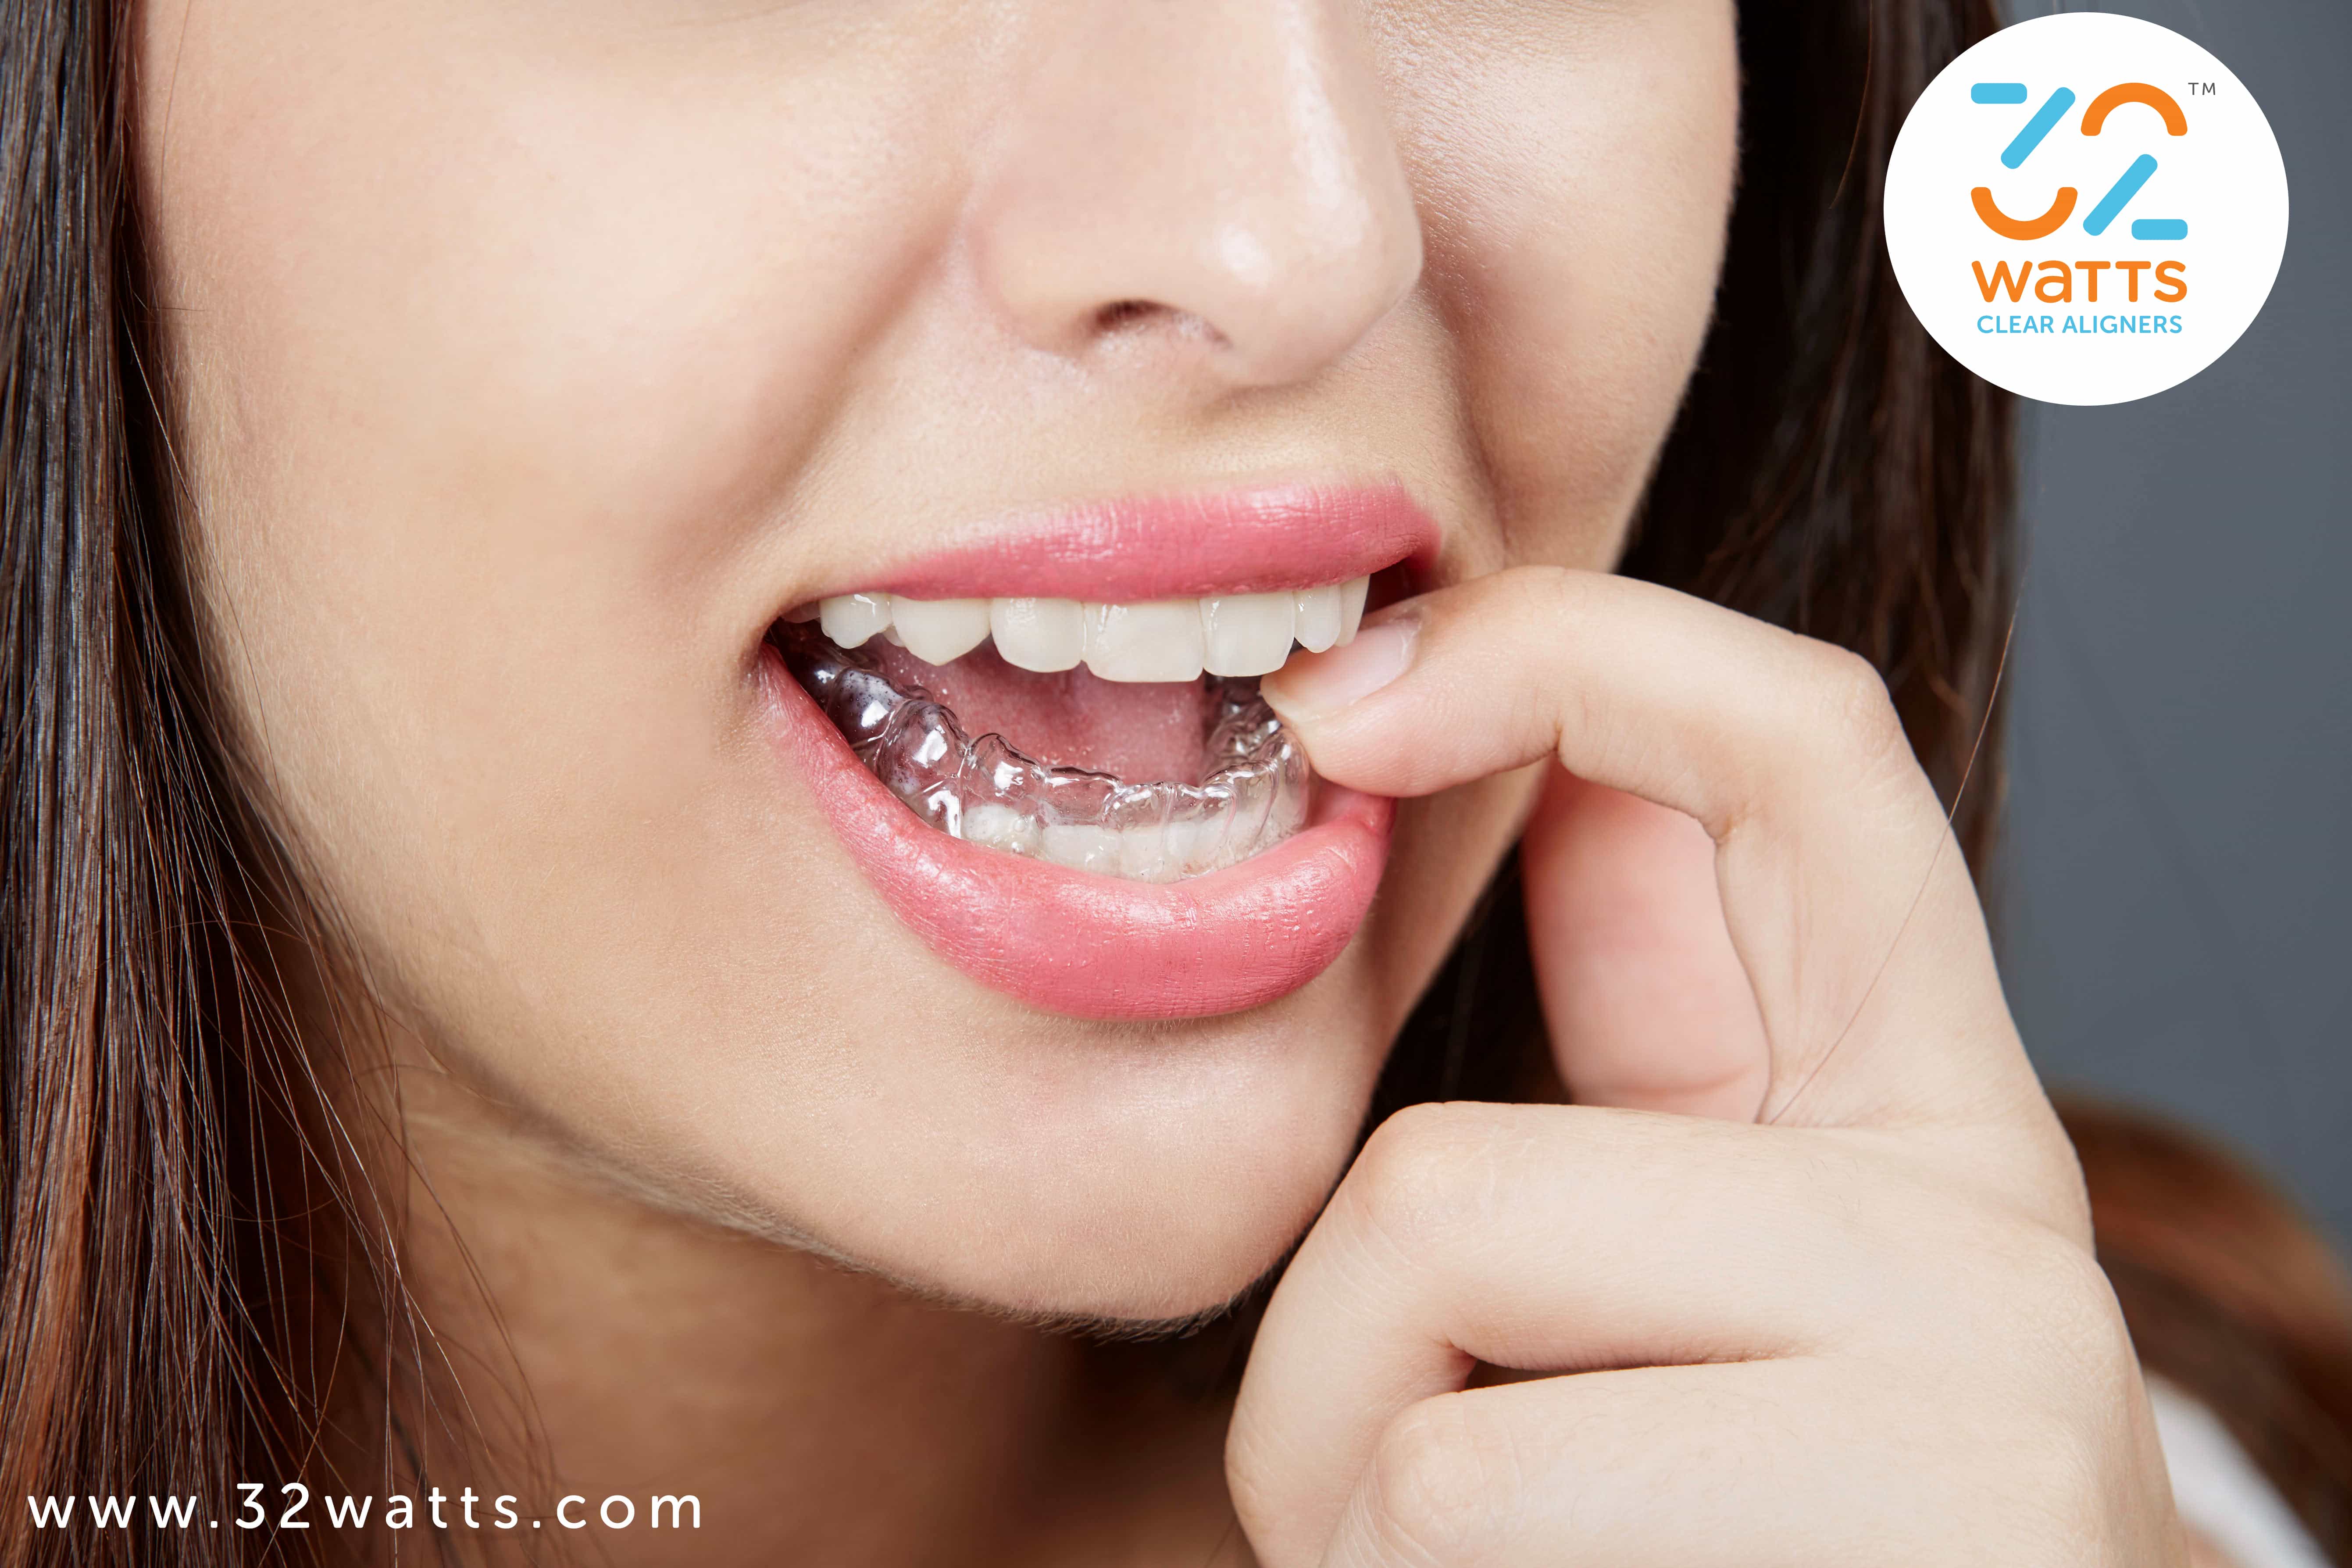 https://www.32watts.com/blog/wp-content/uploads/2019/07/Invisible-Braces-Cost-In-India.jpg